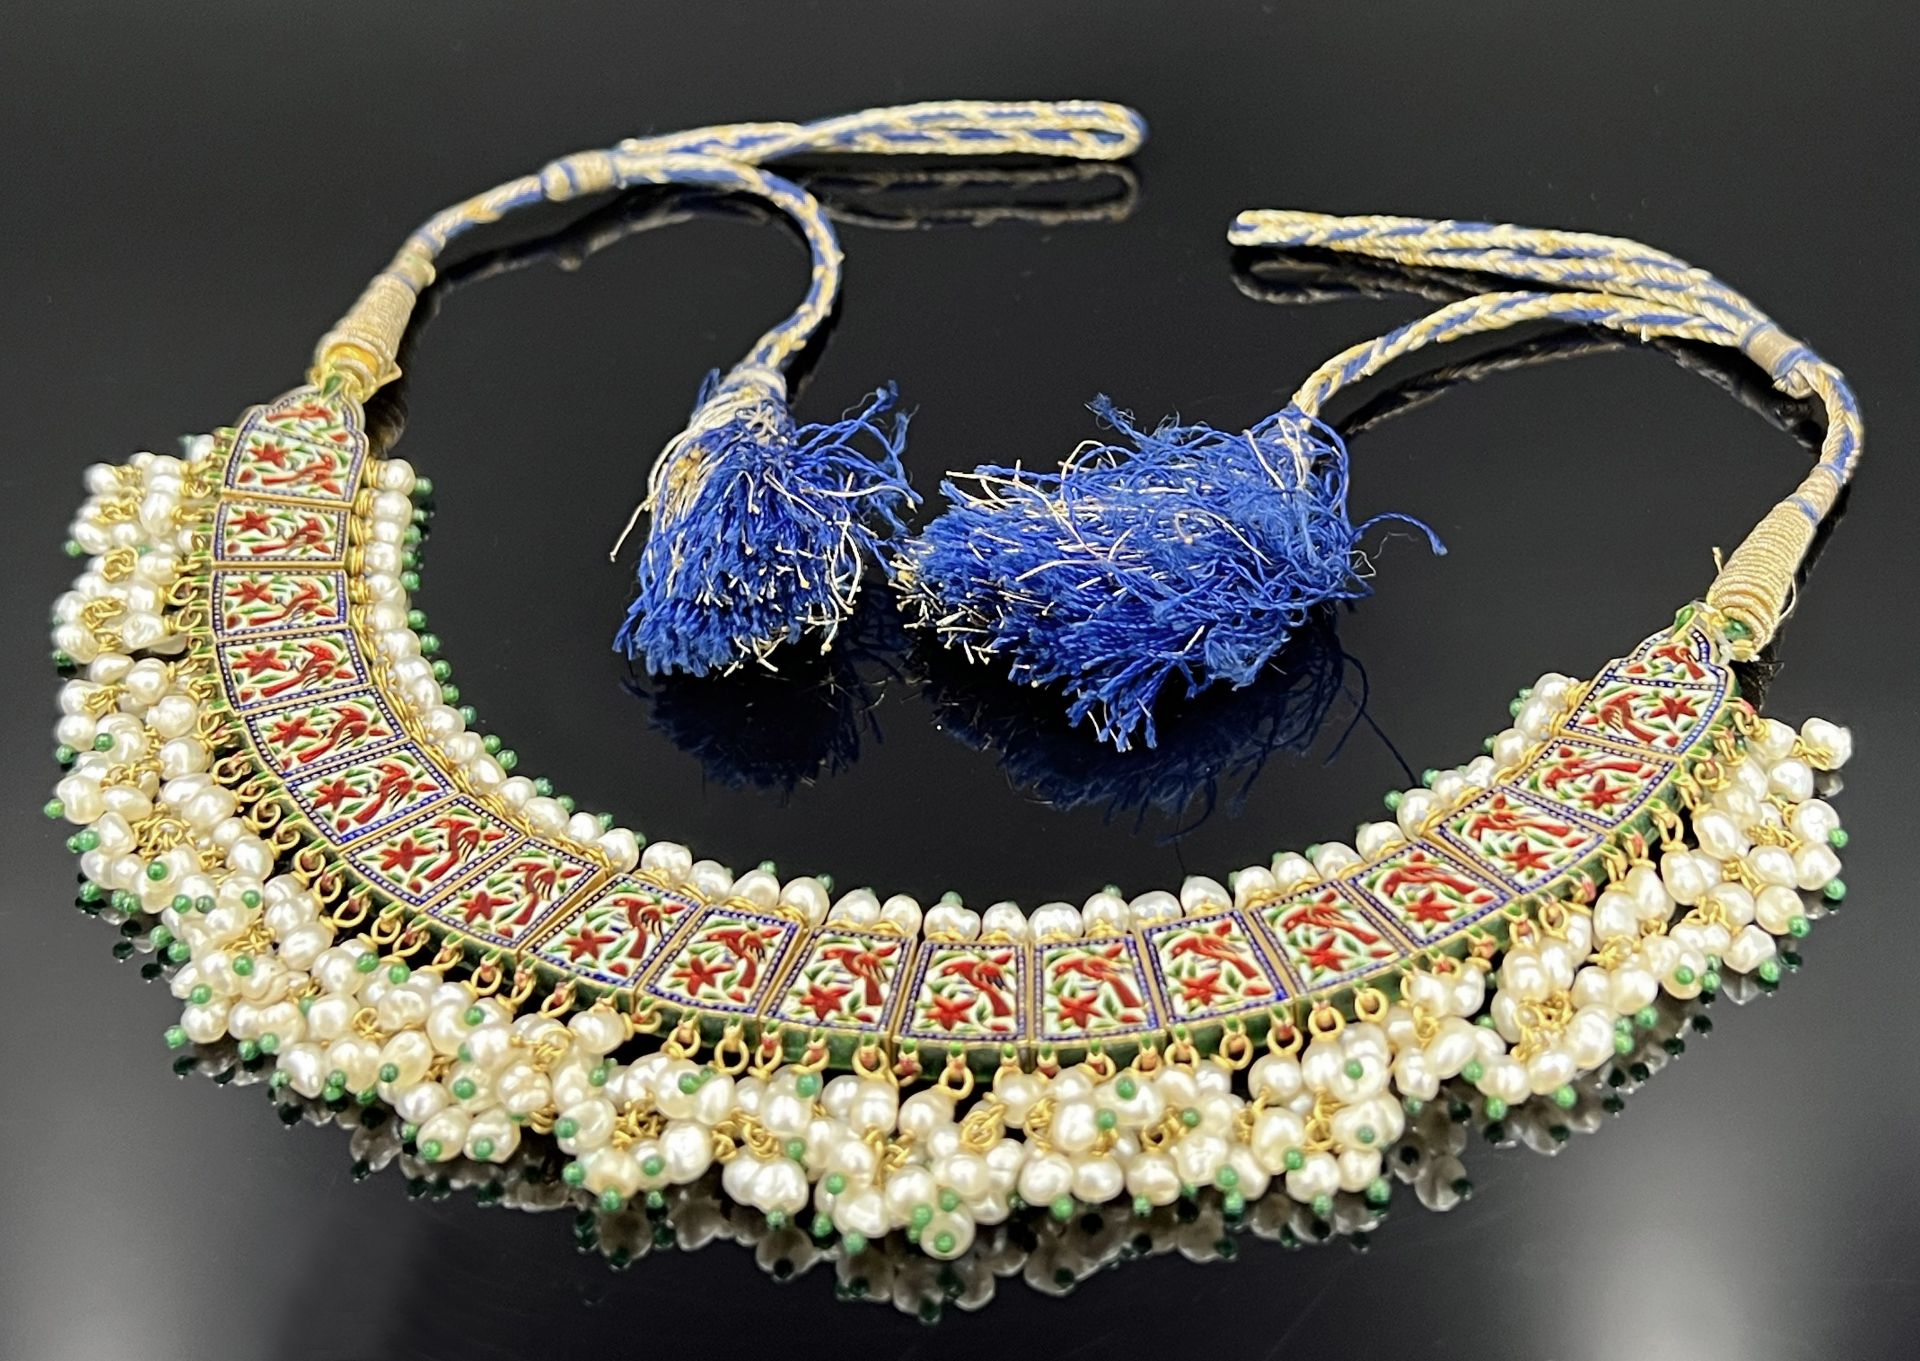 Necklace. 750 yellow gold with diamonds and pearls. Persia. - Image 10 of 16